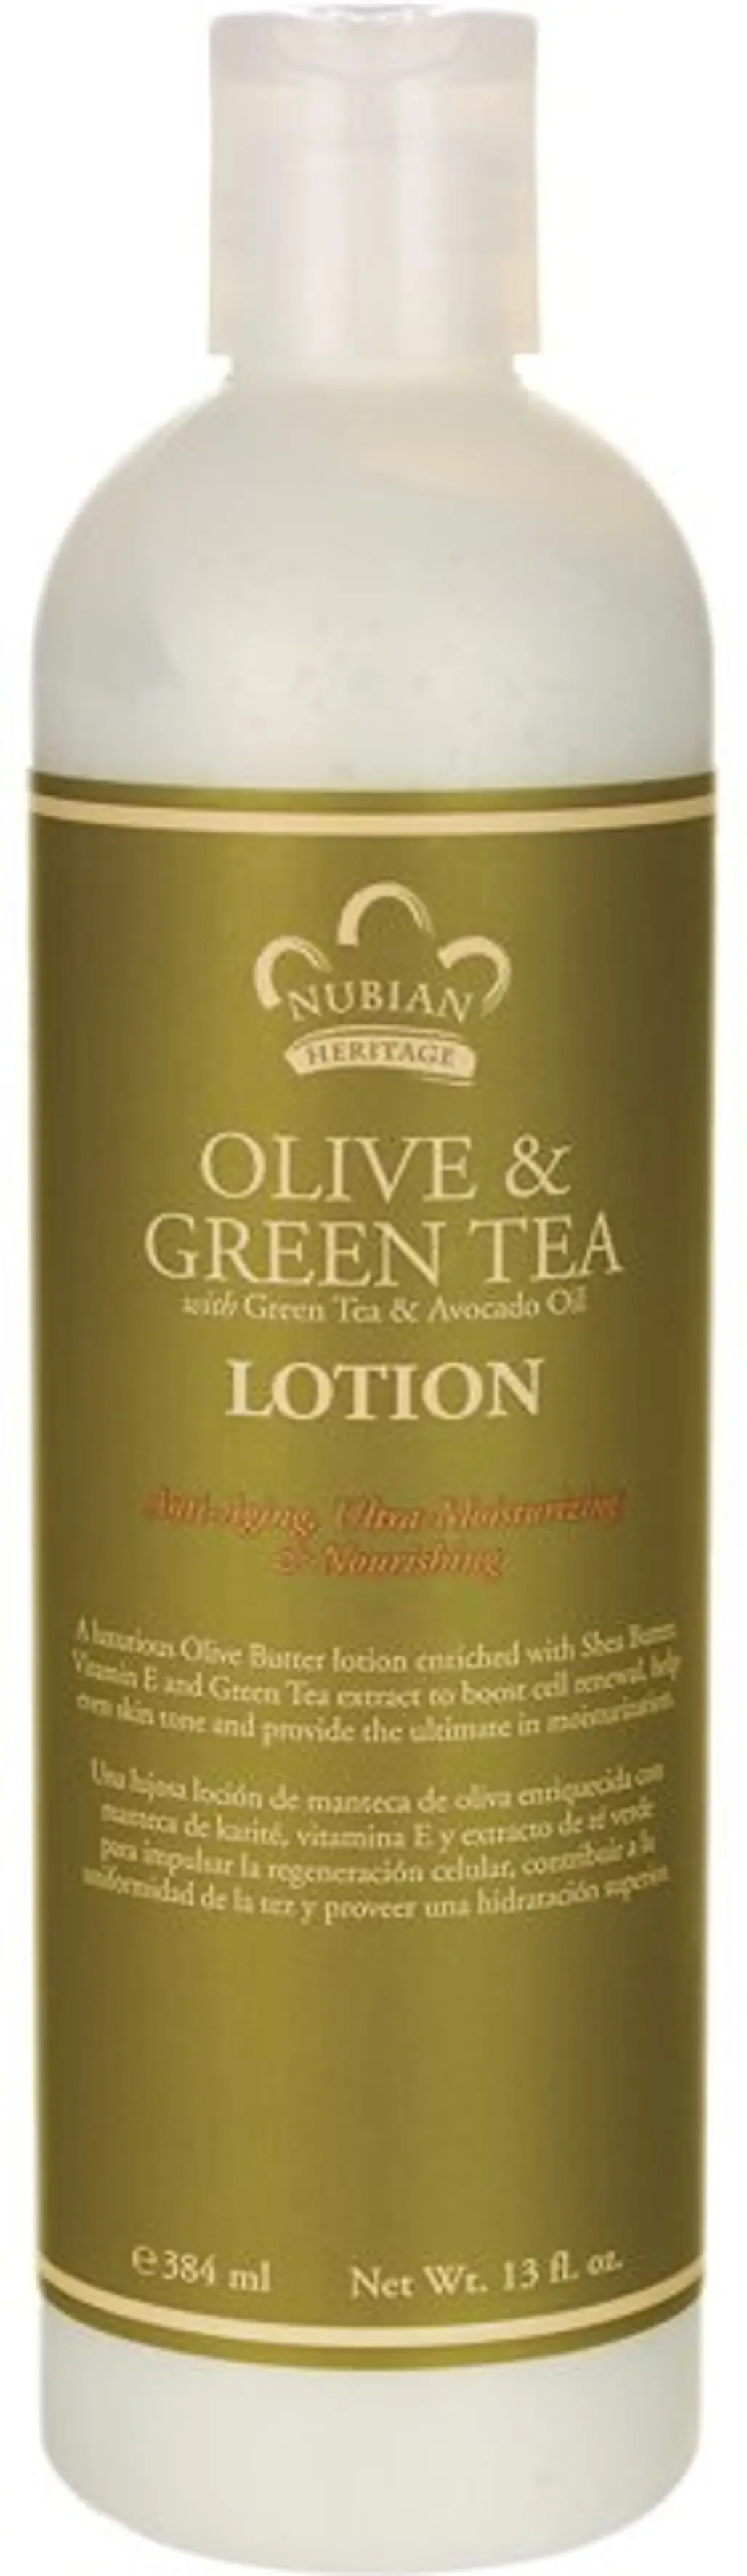 Olive and Green Tea Lotion